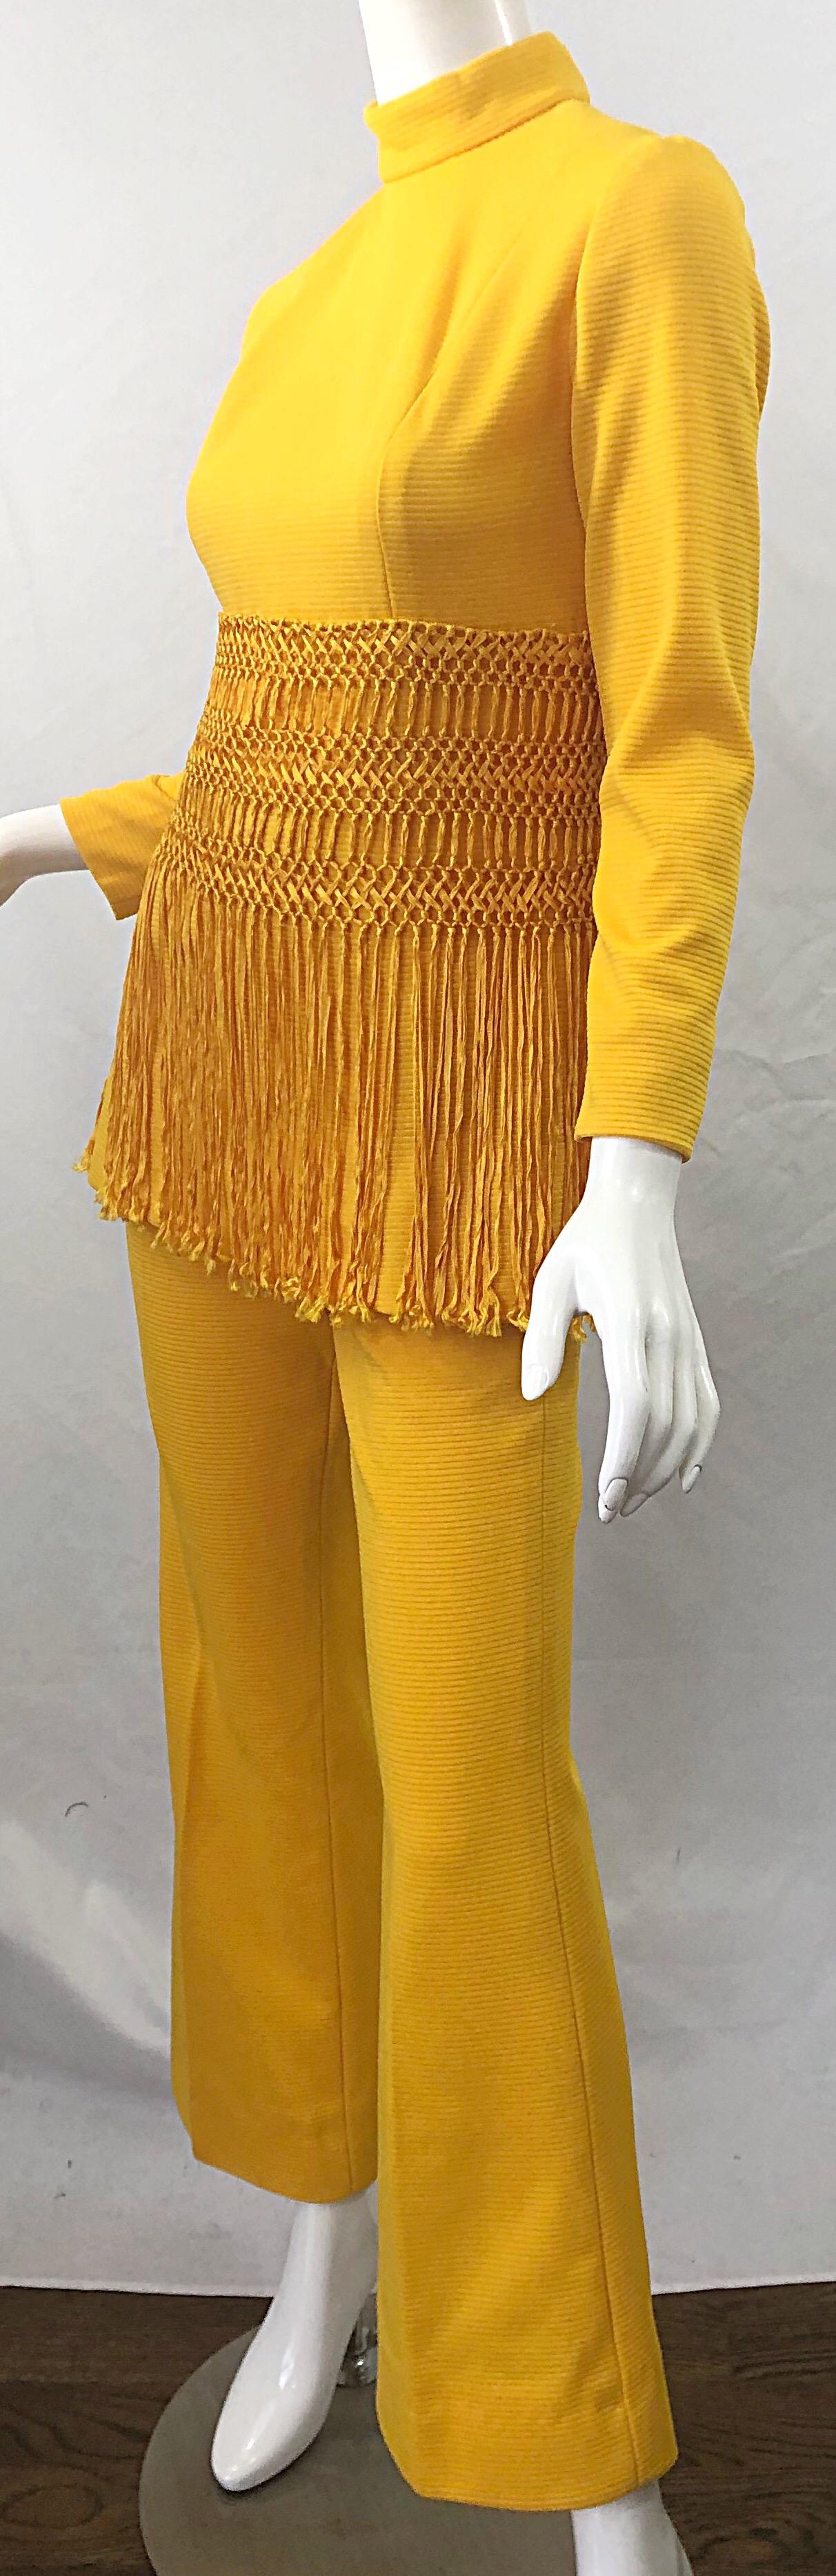 1970s Canary Yellow Fringe Vintage Knit Tunic Top + 70s Bell Bottom Flared Pants 6